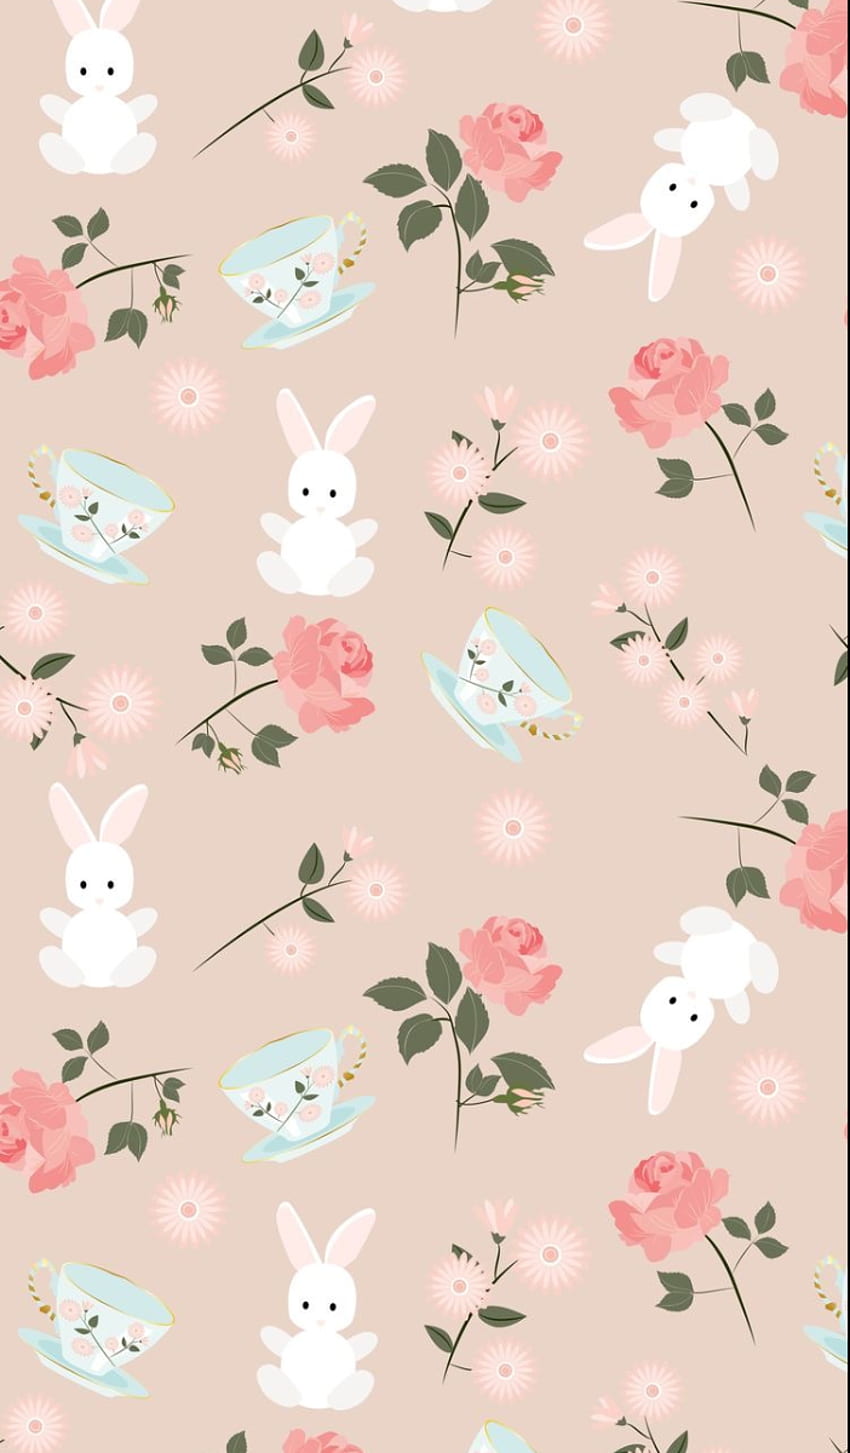 Cute Easter wallpaper with bunnies and flowers on a pink background. Perfect for iPhone, iPad, and desktop. - Easter